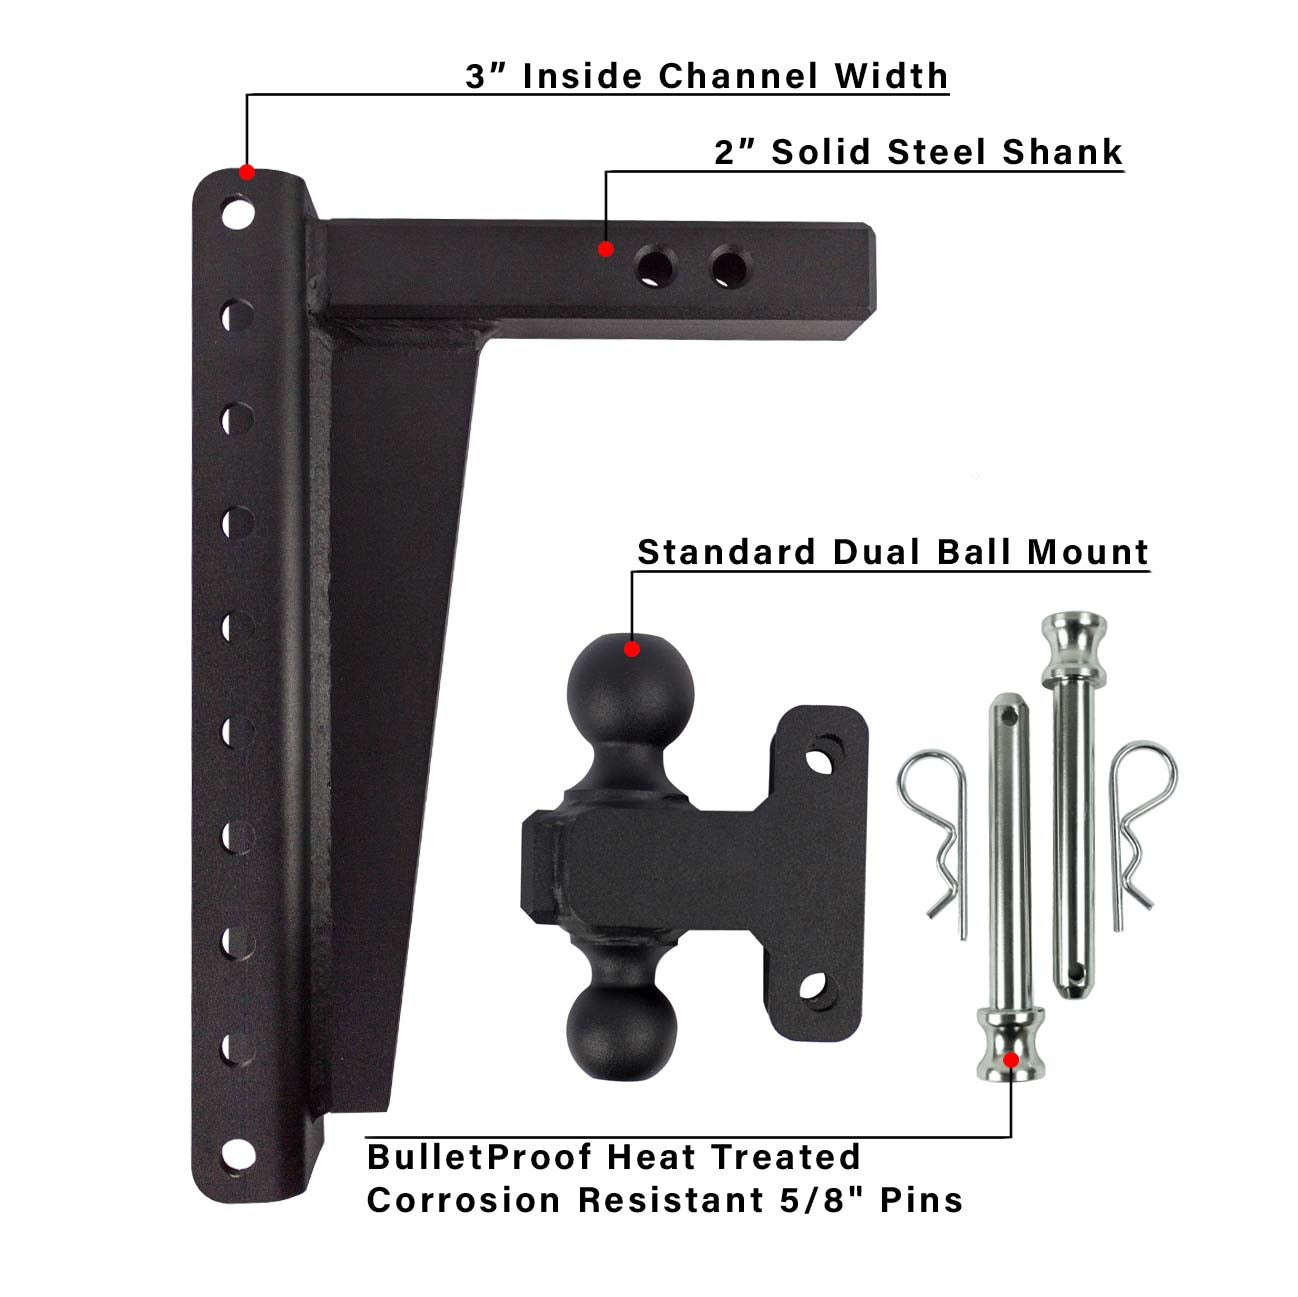 2.0" Heavy Duty 14" Drop/Rise Hitch Included Parts